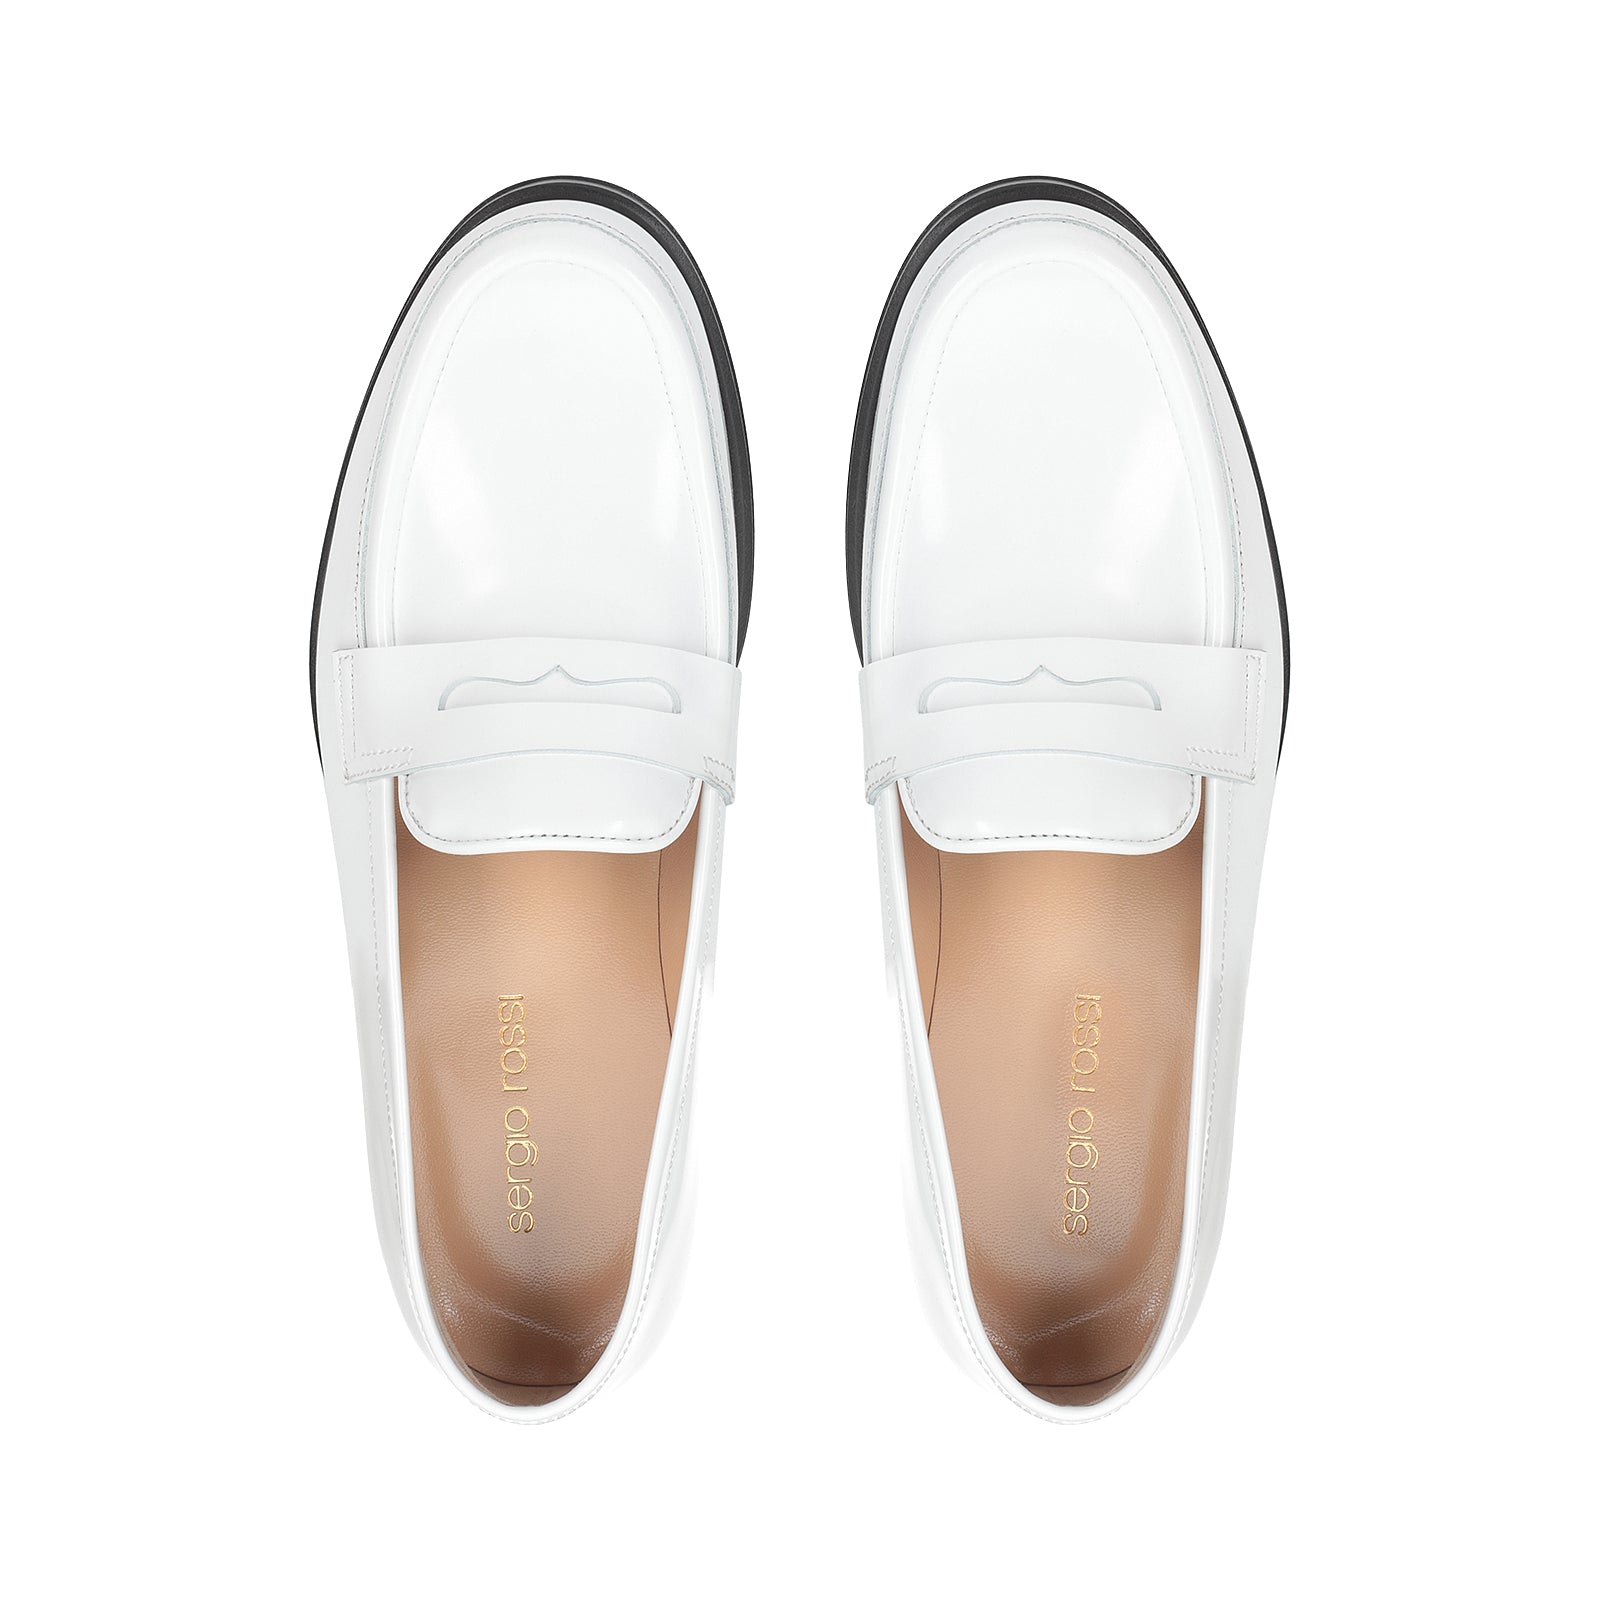 Sr College Loafers - Bianco